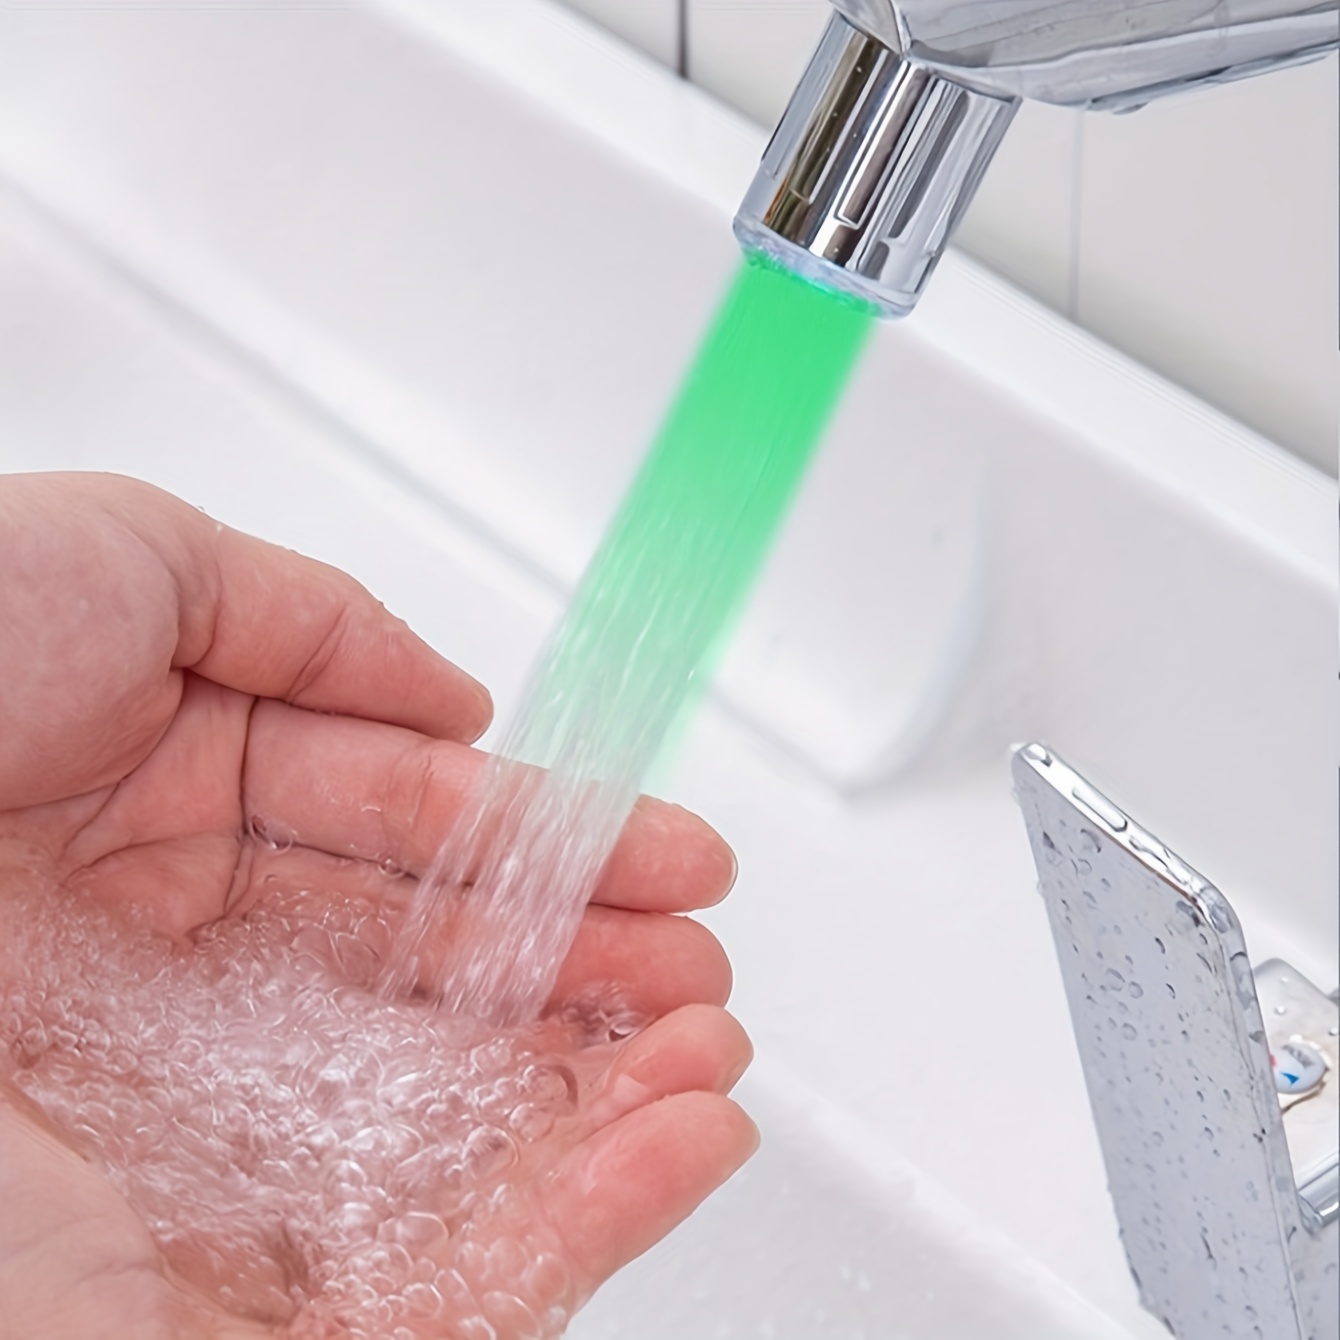 

1pc Colorful Water Nozzle, Faucet Splash-proof Nozzle Extender Filter, Household Kitchen Home Water Shower Filter, Water Saver Water Purifier Sprinkler